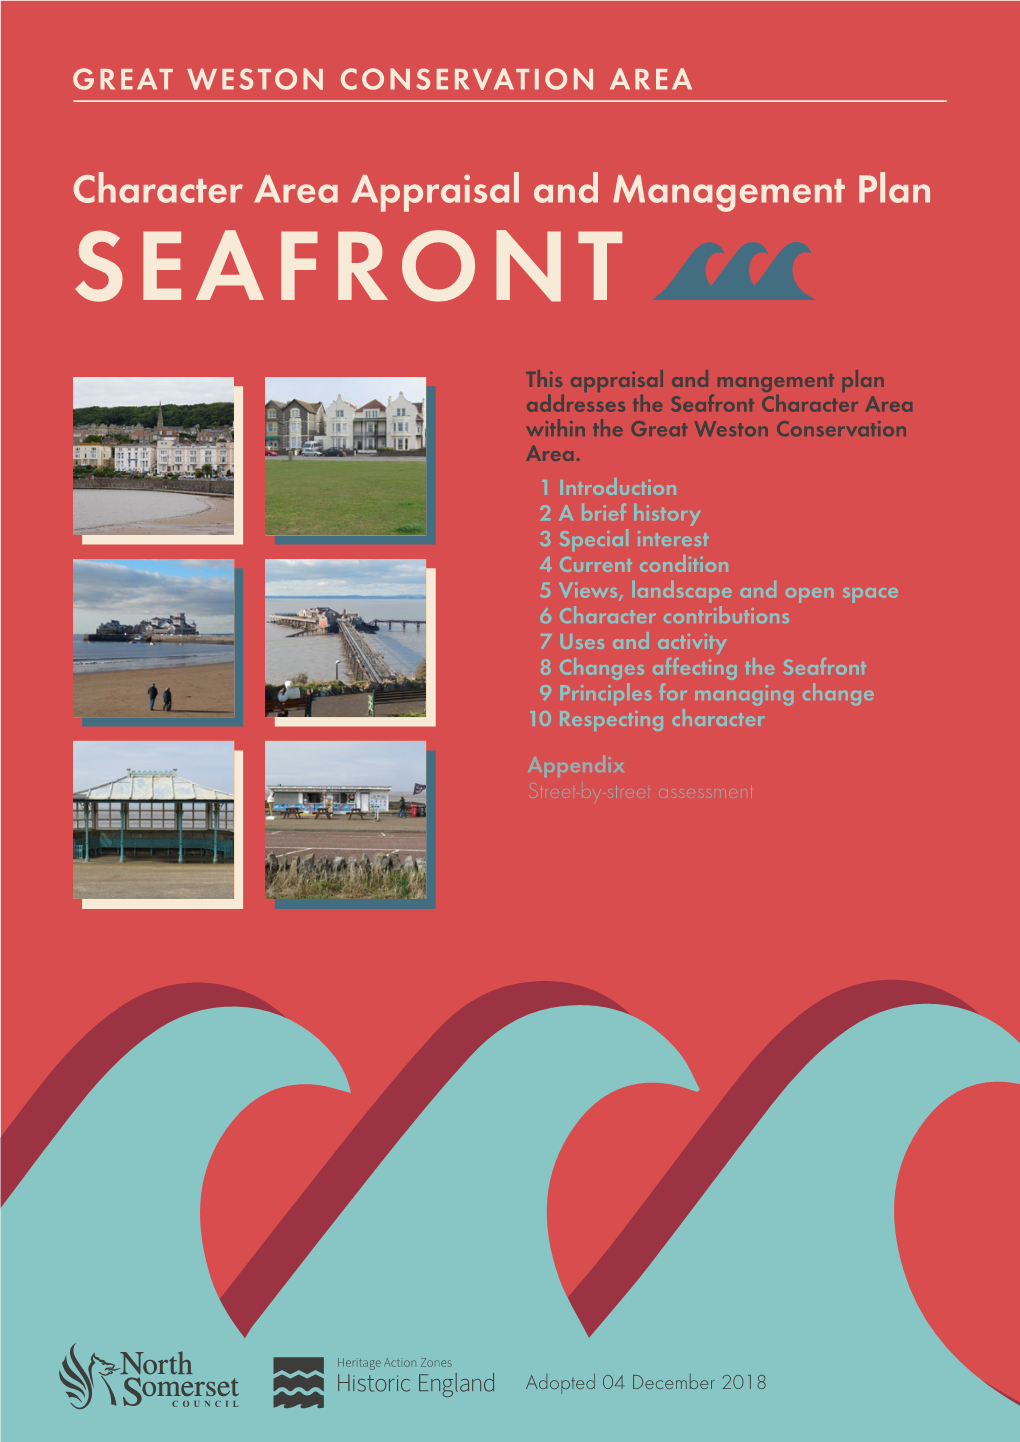 Great Weston Conservation Area Seafront Appraisal.Pdf